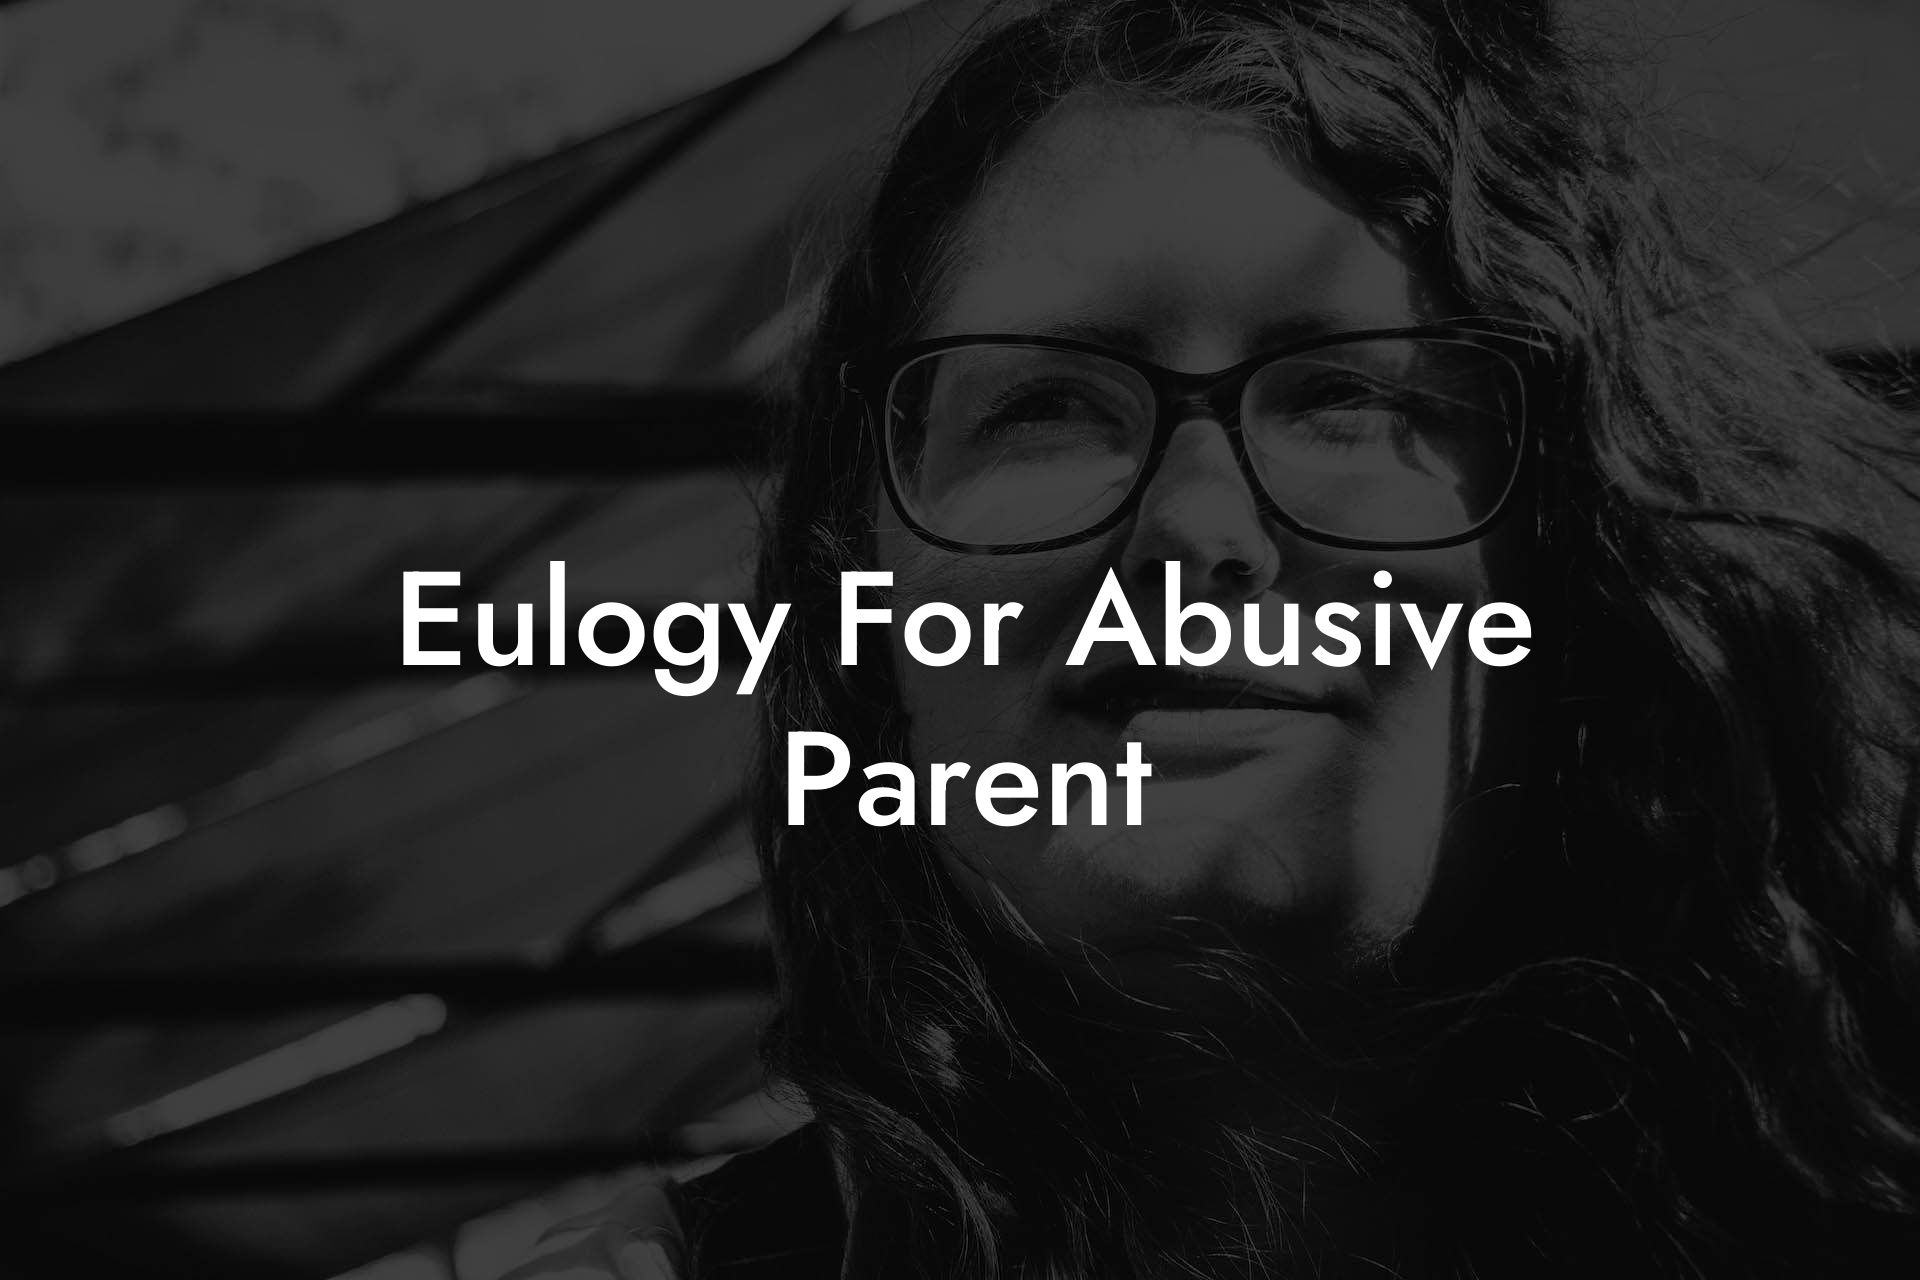 Eulogy For Abusive Parent